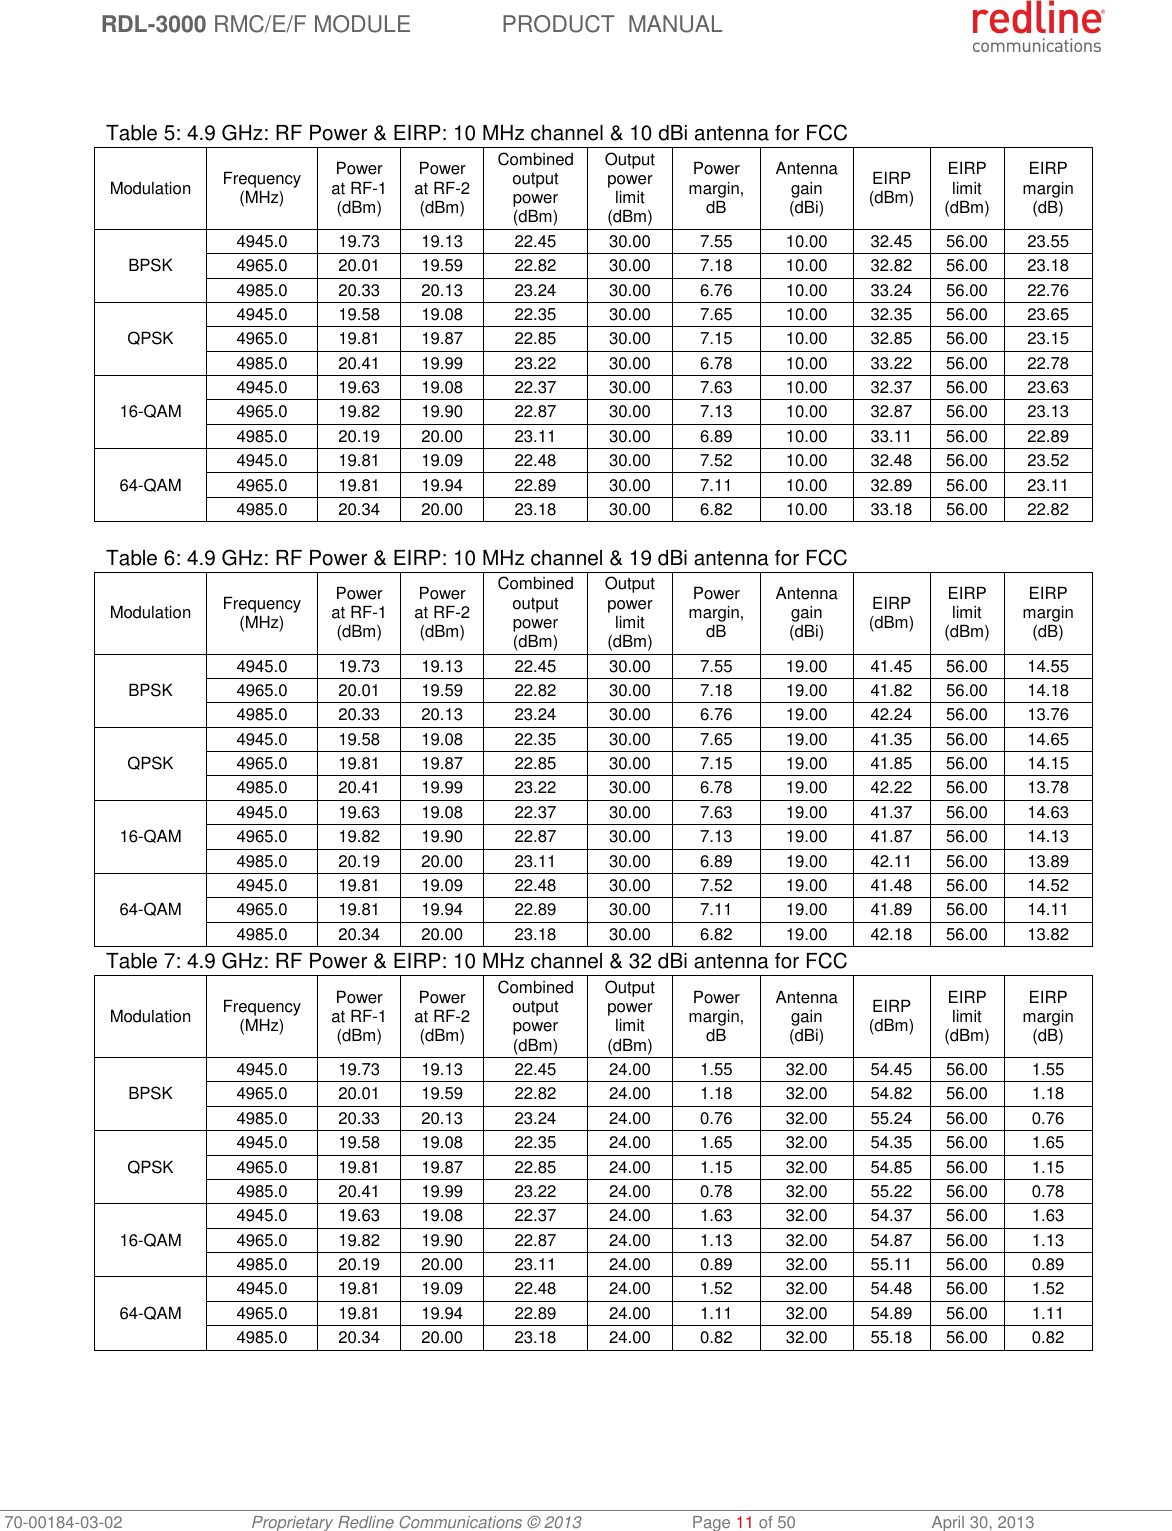  RDL-3000 RMC/E/F MODULE PRODUCT  MANUAL 70-00184-03-02 Proprietary Redline Communications © 2013  Page 11 of 50  April 30, 2013   Table 5: 4.9 GHz: RF Power &amp; EIRP: 10 MHz channel &amp; 10 dBi antenna for FCC Modulation Frequency (MHz) Power at RF-1 (dBm) Power at RF-2 (dBm) Combined output power (dBm) Output power limit (dBm) Power margin, dB Antenna gain (dBi) EIRP (dBm) EIRP limit (dBm) EIRP margin (dB) BPSK 4945.0 19.73 19.13 22.45 30.00 7.55 10.00 32.45 56.00 23.55 4965.0 20.01 19.59 22.82 30.00 7.18 10.00 32.82 56.00 23.18 4985.0 20.33 20.13 23.24 30.00 6.76 10.00 33.24 56.00 22.76 QPSK 4945.0 19.58 19.08 22.35 30.00 7.65 10.00 32.35 56.00 23.65 4965.0 19.81 19.87 22.85 30.00 7.15 10.00 32.85 56.00 23.15 4985.0 20.41 19.99 23.22 30.00 6.78 10.00 33.22 56.00 22.78 16-QAM 4945.0 19.63 19.08 22.37 30.00 7.63 10.00 32.37 56.00 23.63 4965.0 19.82 19.90 22.87 30.00 7.13 10.00 32.87 56.00 23.13 4985.0 20.19 20.00 23.11 30.00 6.89 10.00 33.11 56.00 22.89 64-QAM 4945.0 19.81 19.09 22.48 30.00 7.52 10.00 32.48 56.00 23.52 4965.0 19.81 19.94 22.89 30.00 7.11 10.00 32.89 56.00 23.11 4985.0 20.34 20.00 23.18 30.00 6.82 10.00 33.18 56.00 22.82  Table 6: 4.9 GHz: RF Power &amp; EIRP: 10 MHz channel &amp; 19 dBi antenna for FCC Modulation Frequency (MHz) Power at RF-1 (dBm) Power at RF-2 (dBm) Combined output power (dBm) Output power limit (dBm) Power margin, dB Antenna gain (dBi) EIRP (dBm) EIRP limit (dBm) EIRP margin (dB) BPSK 4945.0 19.73 19.13 22.45 30.00 7.55 19.00 41.45 56.00 14.55 4965.0 20.01 19.59 22.82 30.00 7.18 19.00 41.82 56.00 14.18 4985.0 20.33 20.13 23.24 30.00 6.76 19.00 42.24 56.00 13.76 QPSK 4945.0 19.58 19.08 22.35 30.00 7.65 19.00 41.35 56.00 14.65 4965.0 19.81 19.87 22.85 30.00 7.15 19.00 41.85 56.00 14.15 4985.0 20.41 19.99 23.22 30.00 6.78 19.00 42.22 56.00 13.78 16-QAM 4945.0 19.63 19.08 22.37 30.00 7.63 19.00 41.37 56.00 14.63 4965.0 19.82 19.90 22.87 30.00 7.13 19.00 41.87 56.00 14.13 4985.0 20.19 20.00 23.11 30.00 6.89 19.00 42.11 56.00 13.89 64-QAM 4945.0 19.81 19.09 22.48 30.00 7.52 19.00 41.48 56.00 14.52 4965.0 19.81 19.94 22.89 30.00 7.11 19.00 41.89 56.00 14.11 4985.0 20.34 20.00 23.18 30.00 6.82 19.00 42.18 56.00 13.82 Table 7: 4.9 GHz: RF Power &amp; EIRP: 10 MHz channel &amp; 32 dBi antenna for FCC Modulation Frequency (MHz) Power at RF-1 (dBm) Power at RF-2 (dBm) Combined output power (dBm) Output power limit (dBm) Power margin, dB Antenna gain (dBi) EIRP (dBm) EIRP limit (dBm) EIRP margin (dB) BPSK 4945.0 19.73 19.13 22.45 24.00 1.55 32.00 54.45 56.00 1.55 4965.0 20.01 19.59 22.82 24.00 1.18 32.00 54.82 56.00 1.18 4985.0 20.33 20.13 23.24 24.00 0.76 32.00 55.24 56.00 0.76 QPSK 4945.0 19.58 19.08 22.35 24.00 1.65 32.00 54.35 56.00 1.65 4965.0 19.81 19.87 22.85 24.00 1.15 32.00 54.85 56.00 1.15 4985.0 20.41 19.99 23.22 24.00 0.78 32.00 55.22 56.00 0.78 16-QAM 4945.0 19.63 19.08 22.37 24.00 1.63 32.00 54.37 56.00 1.63 4965.0 19.82 19.90 22.87 24.00 1.13 32.00 54.87 56.00 1.13 4985.0 20.19 20.00 23.11 24.00 0.89 32.00 55.11 56.00 0.89 64-QAM 4945.0 19.81 19.09 22.48 24.00 1.52 32.00 54.48 56.00 1.52 4965.0 19.81 19.94 22.89 24.00 1.11 32.00 54.89 56.00 1.11 4985.0 20.34 20.00 23.18 24.00 0.82 32.00 55.18 56.00 0.82  